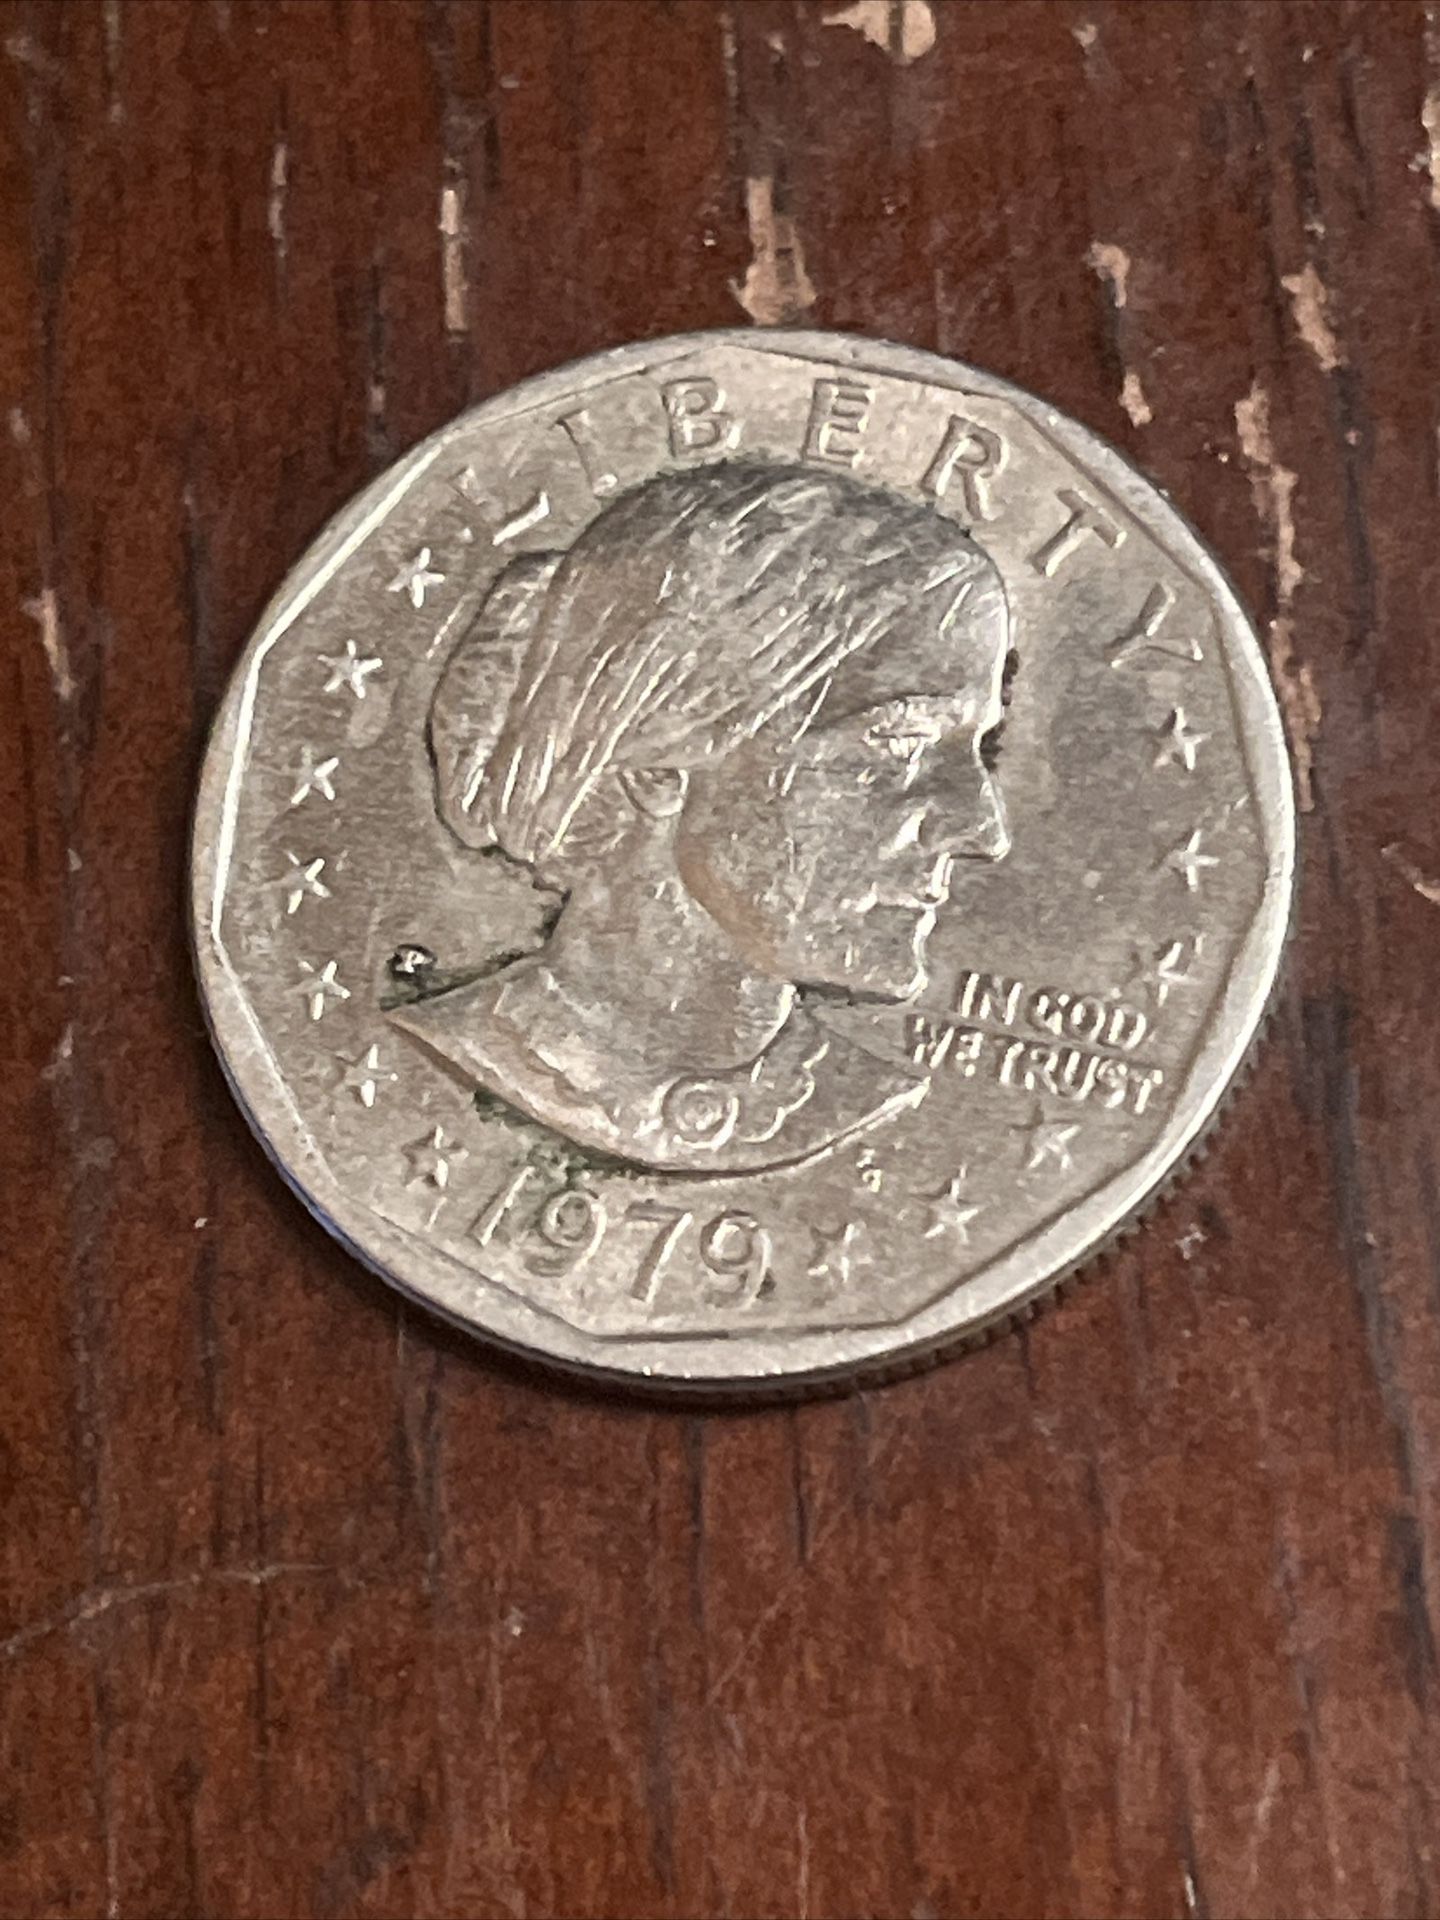 1979 Susan B Anthony $1 Coin